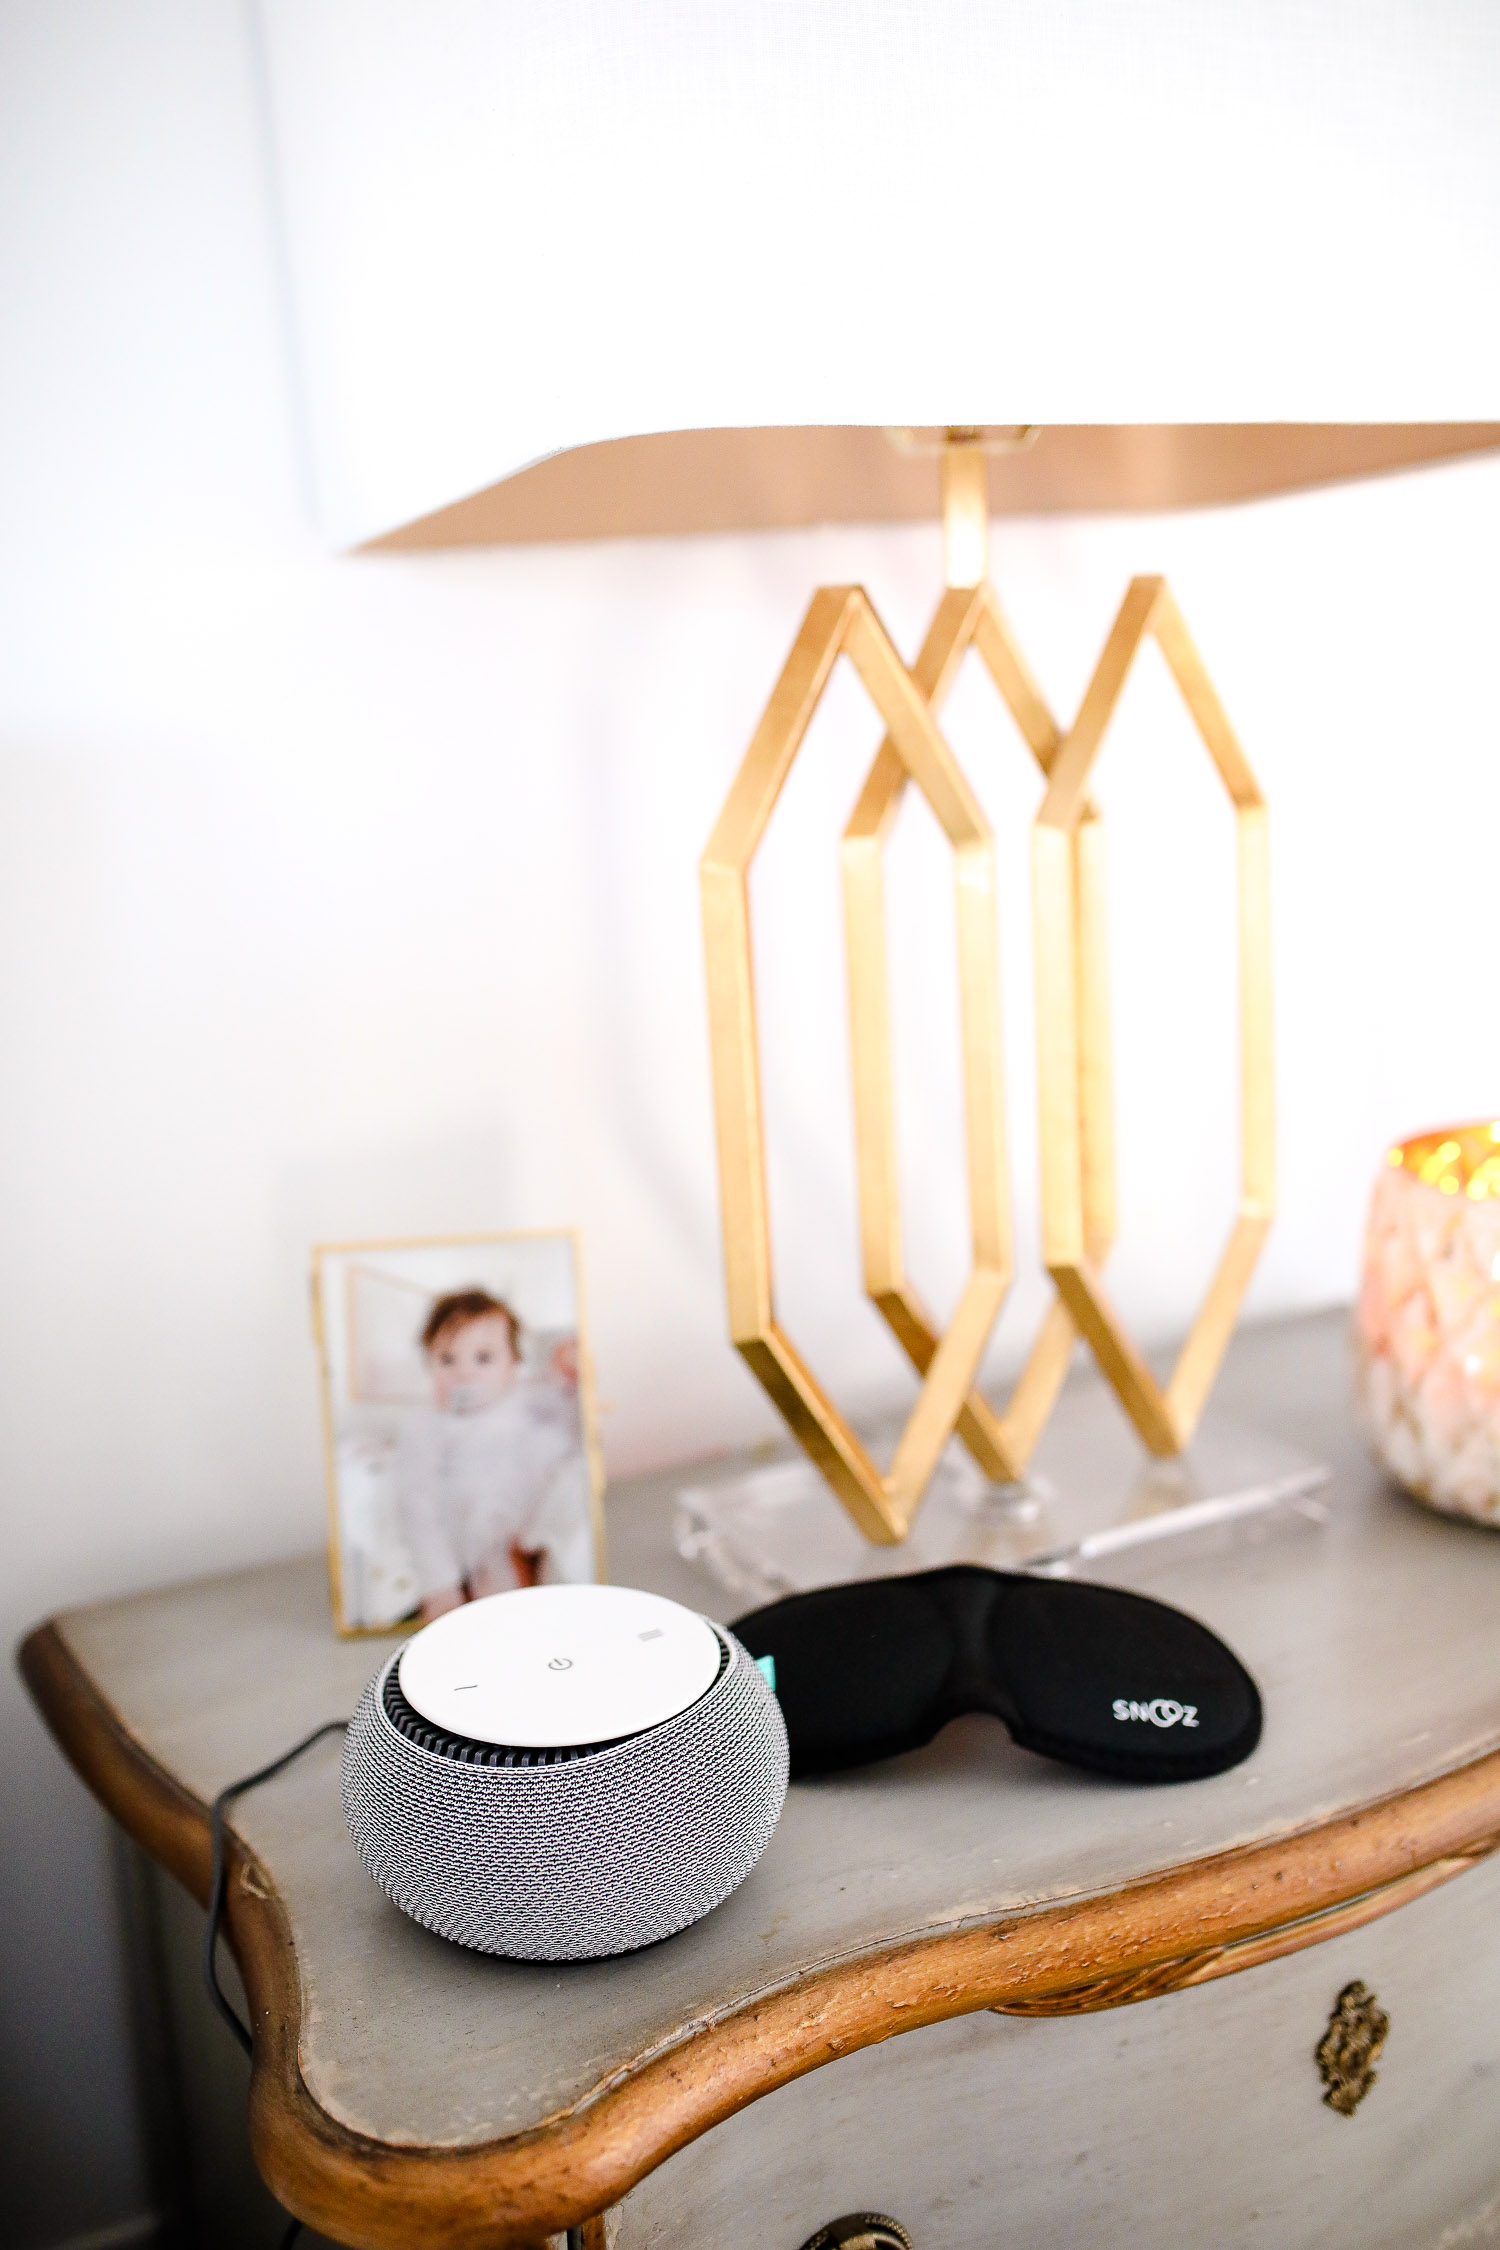 verishop, verishop review, pinterest master bedroom inspo, emily gemma, hooker furniture nightstands-2 | Cozy Essentials by popular US fashion blog, The Sweetest Thing: image of a night stand with a Verishop Snooz sleep mask and a Verishop Snooz Snooz SNOOZ White Noise Sound Machine.